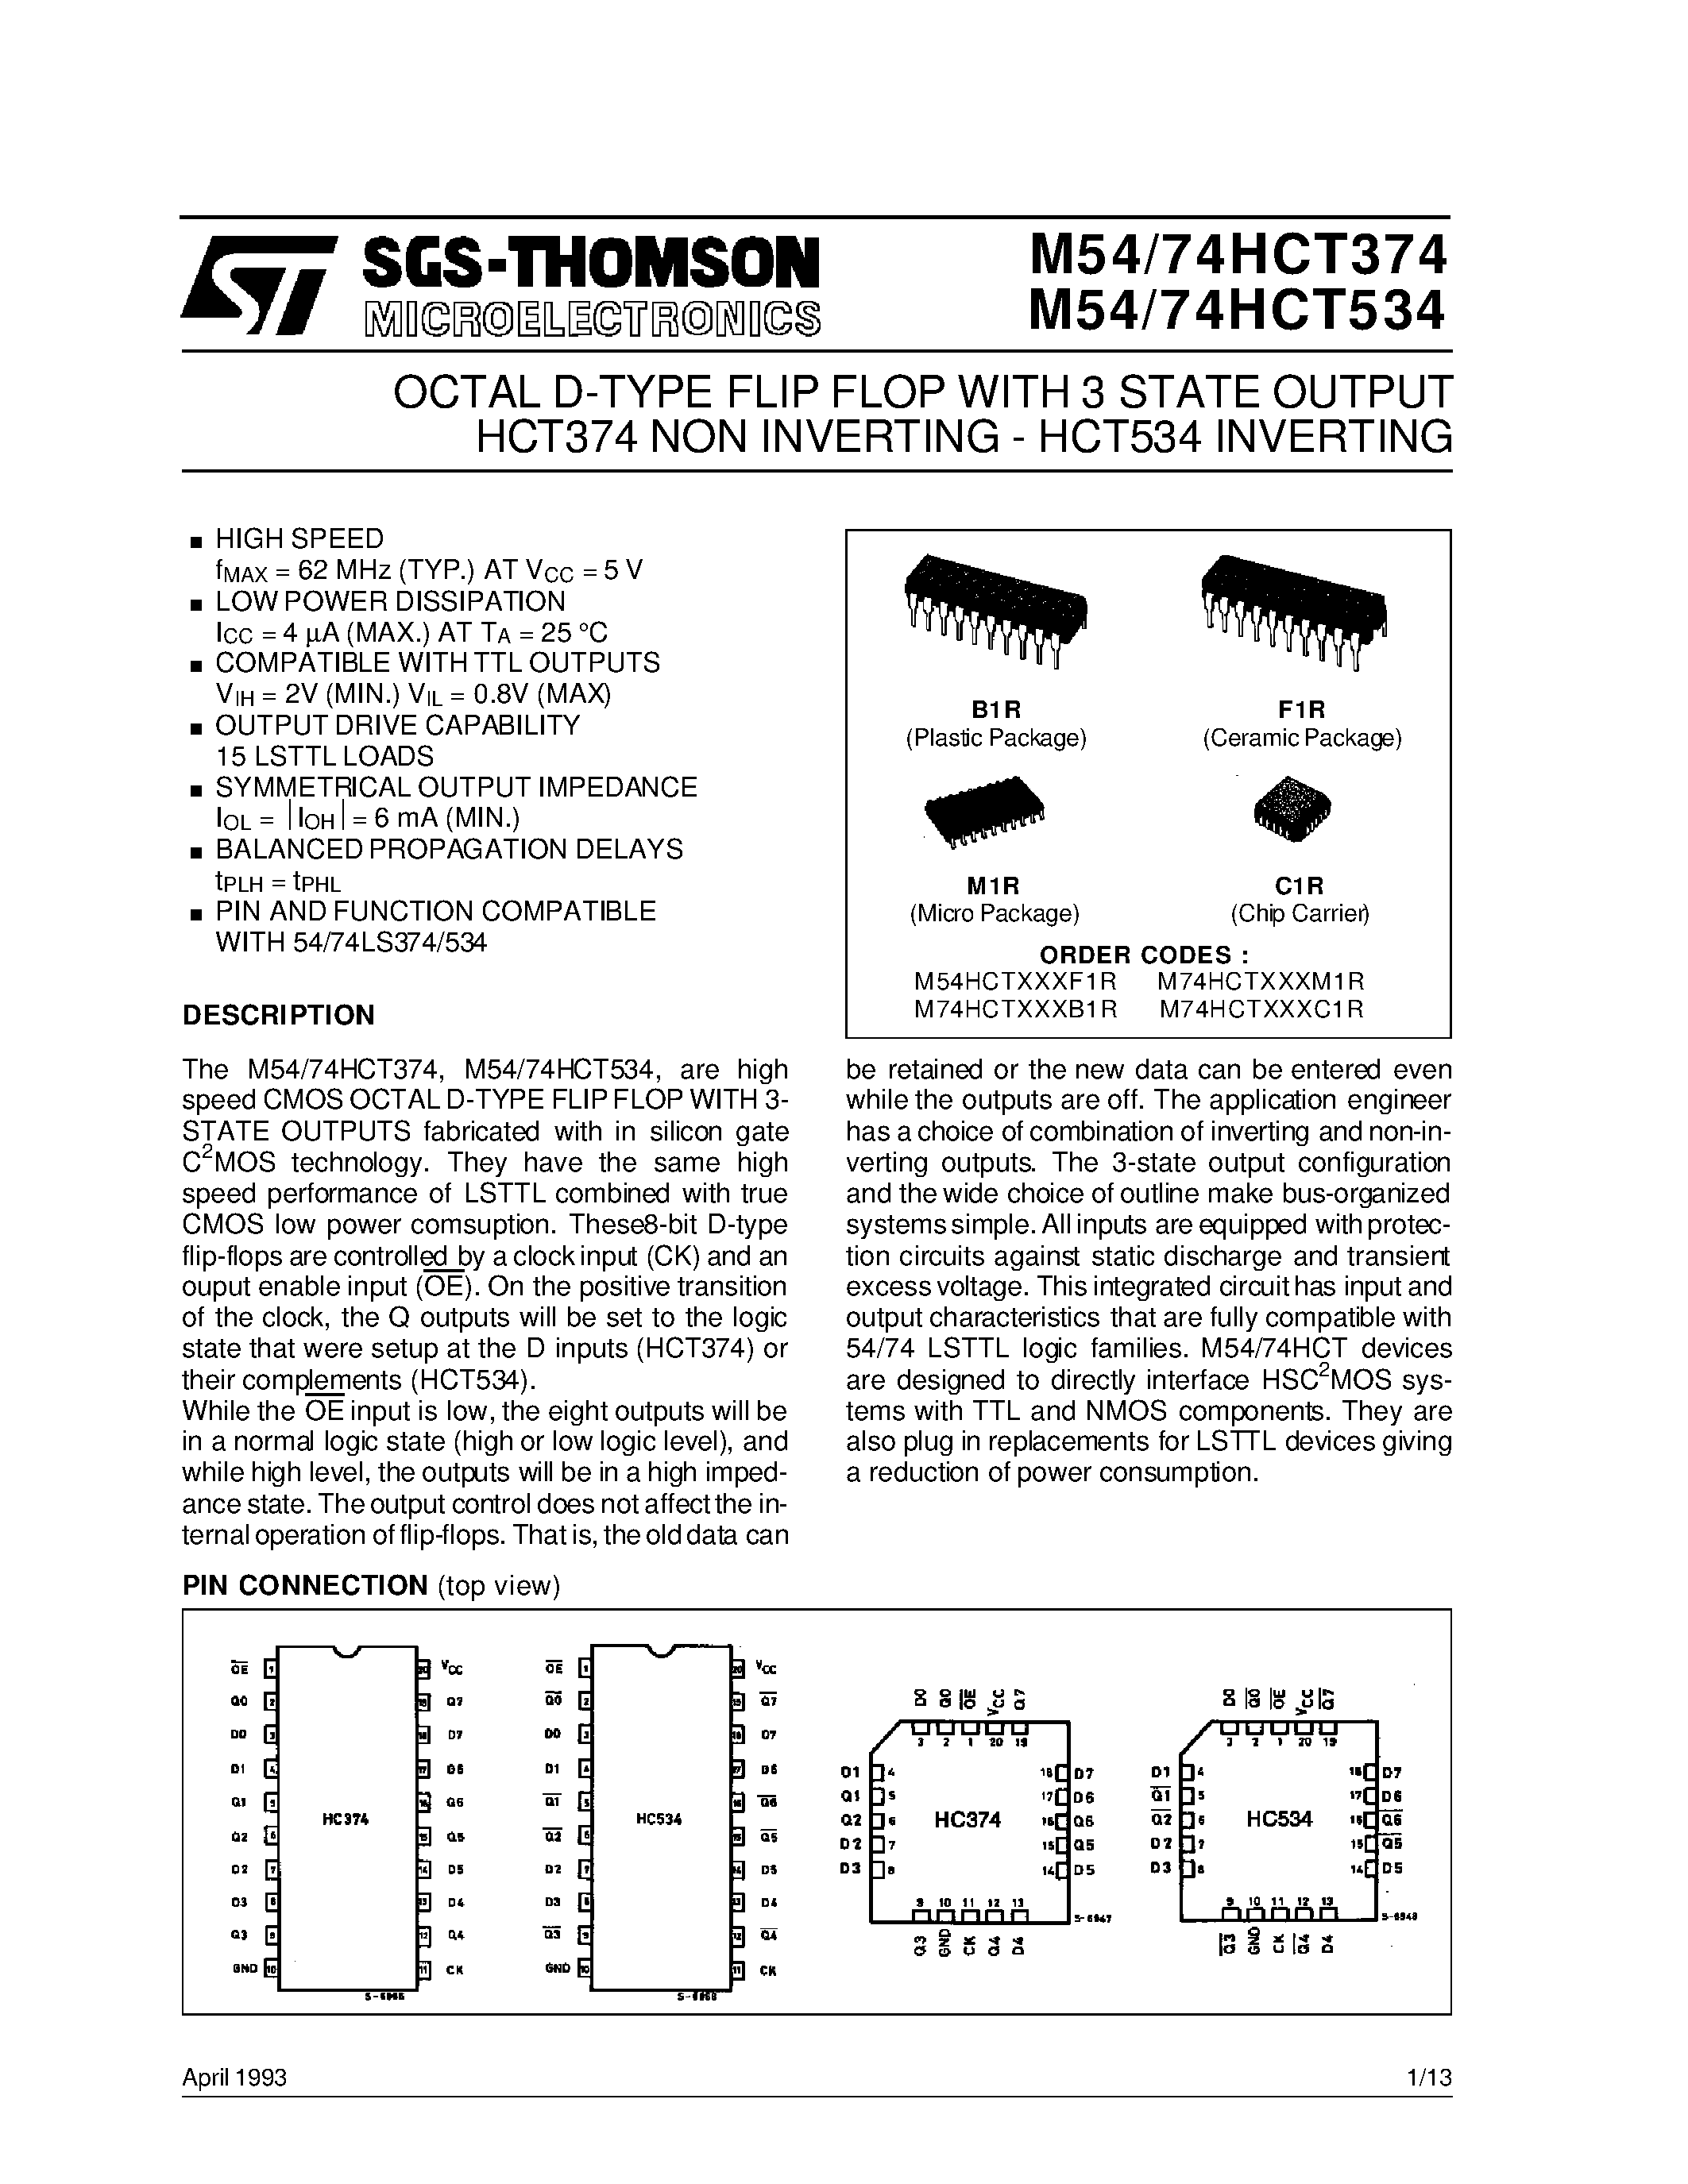 Datasheet M74HCT374 - OCTAL D-TYPE FLIP FLOP WITH 3 STATE OUTPUT HCT374 NON INVERTING - HCT534 INVERTING page 1